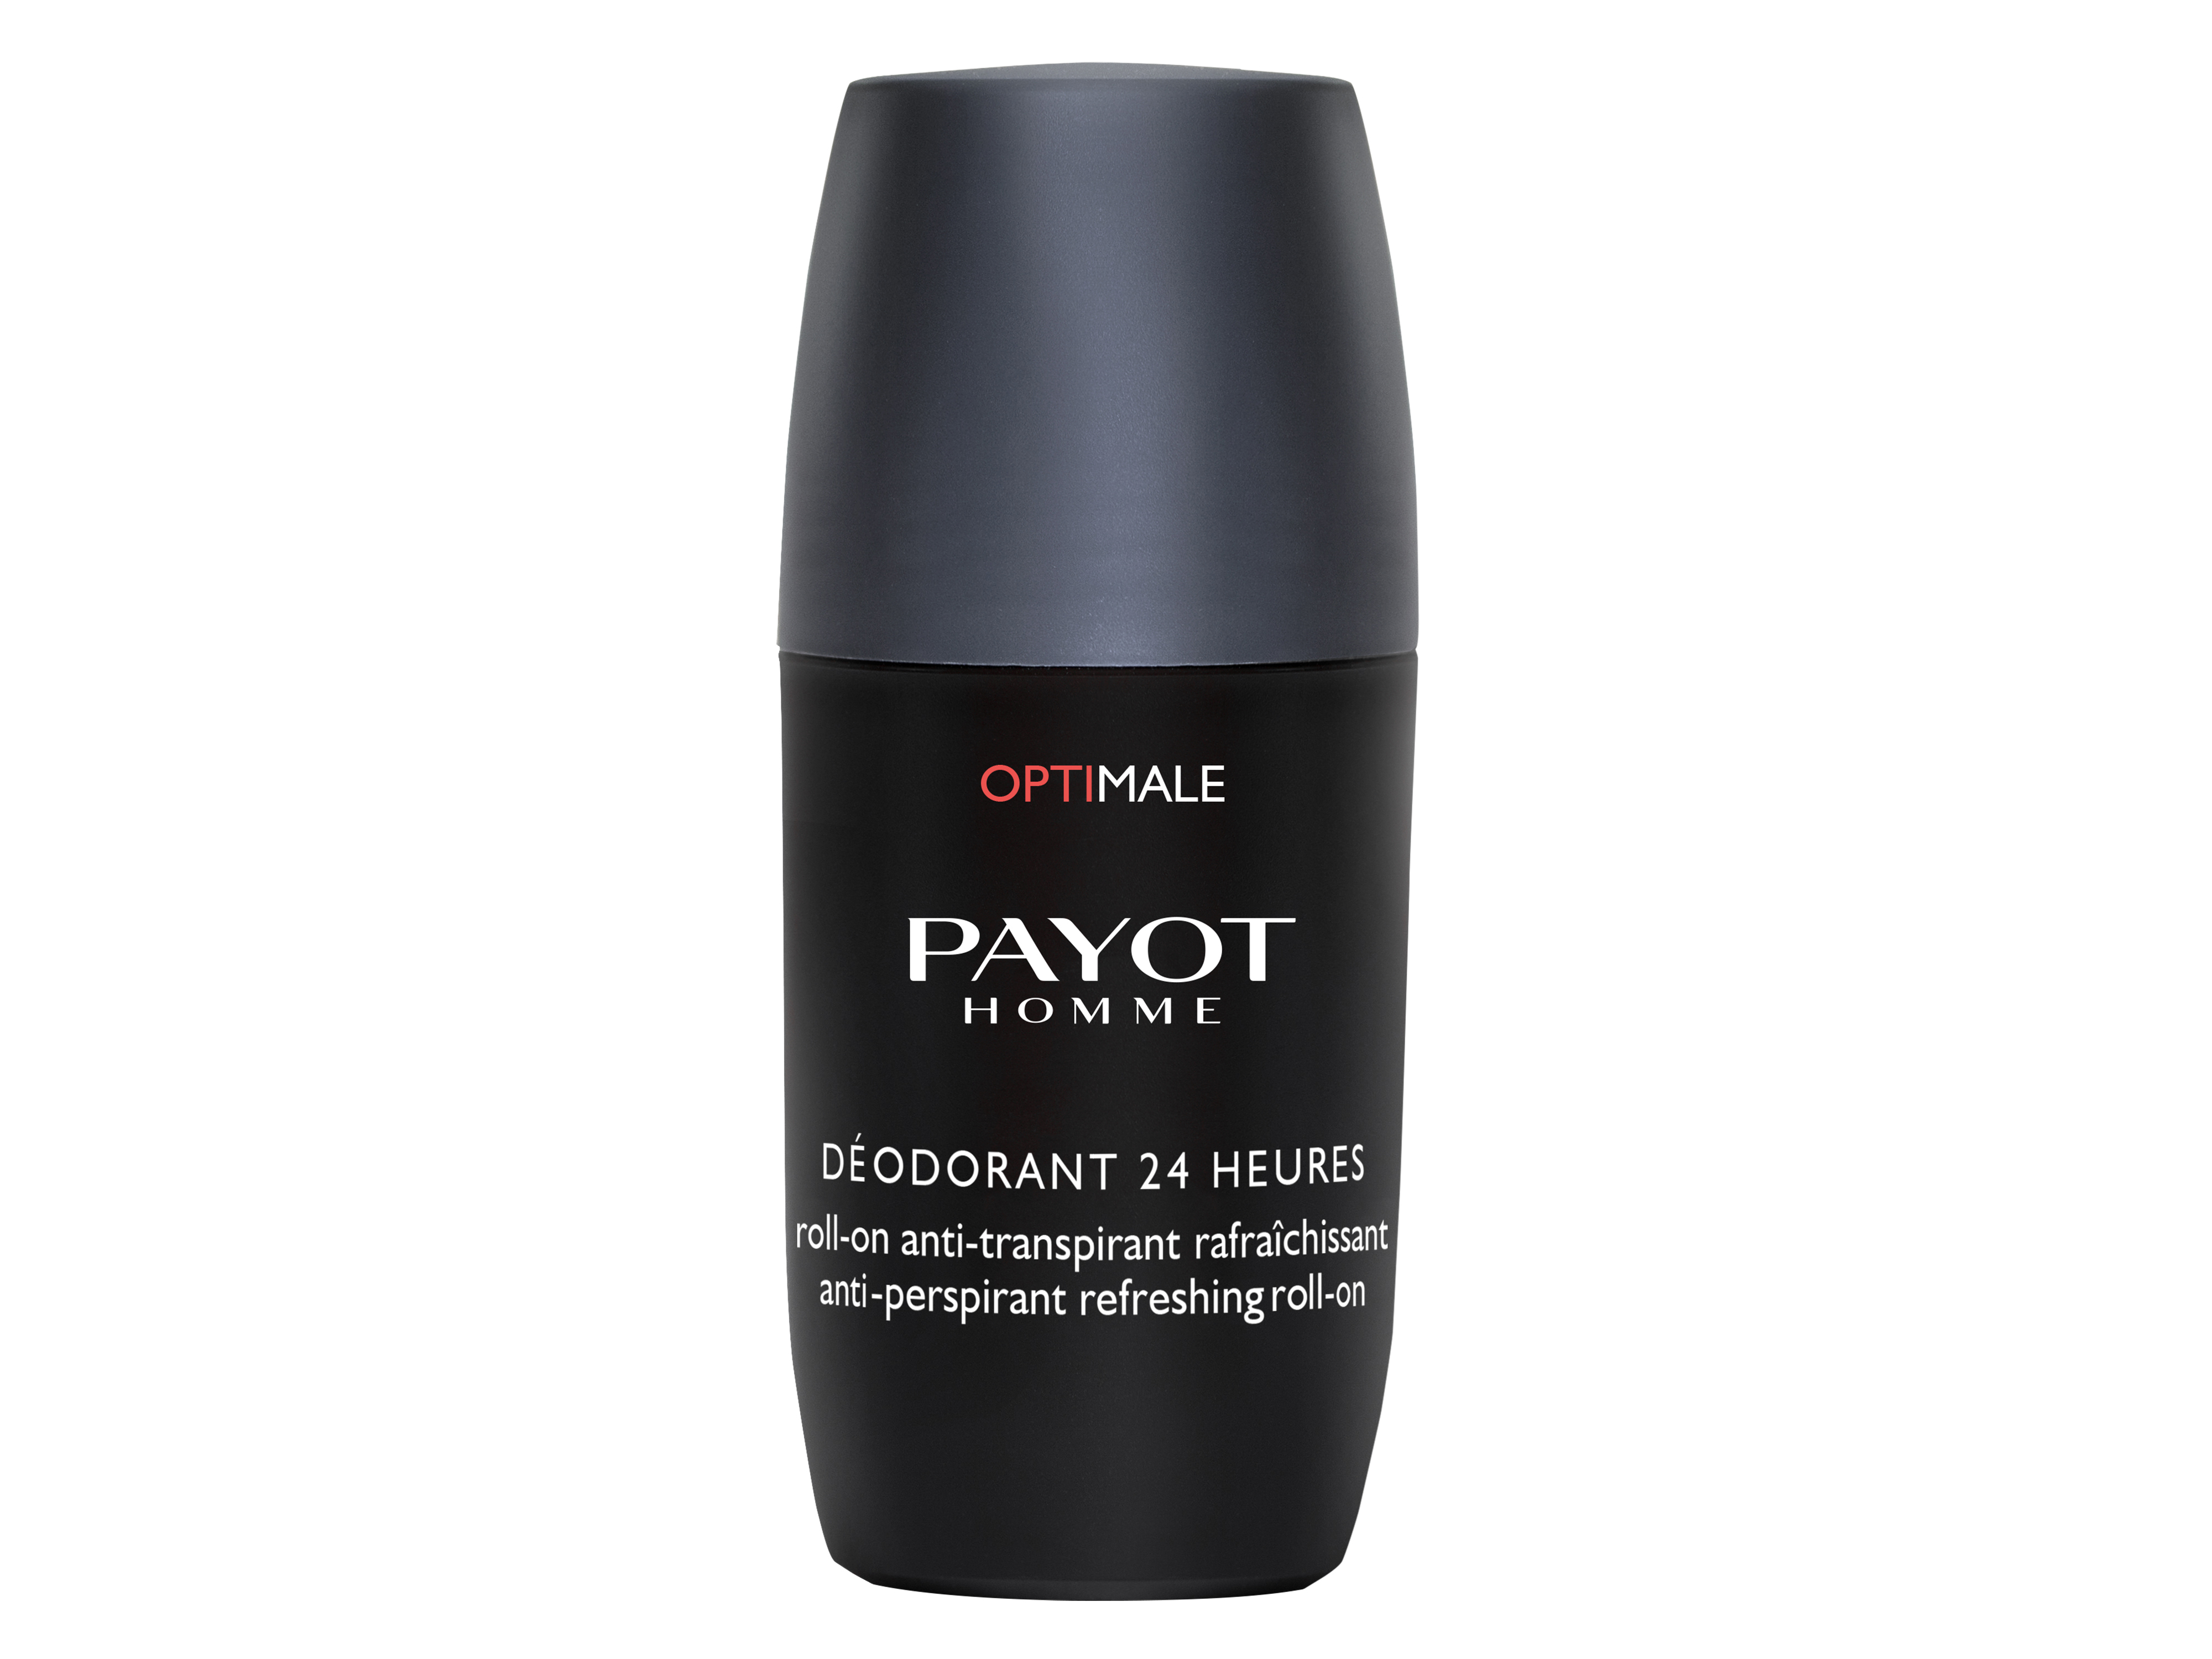 Payot Payot Homme Optimale Deodorant 24 Heures, 75